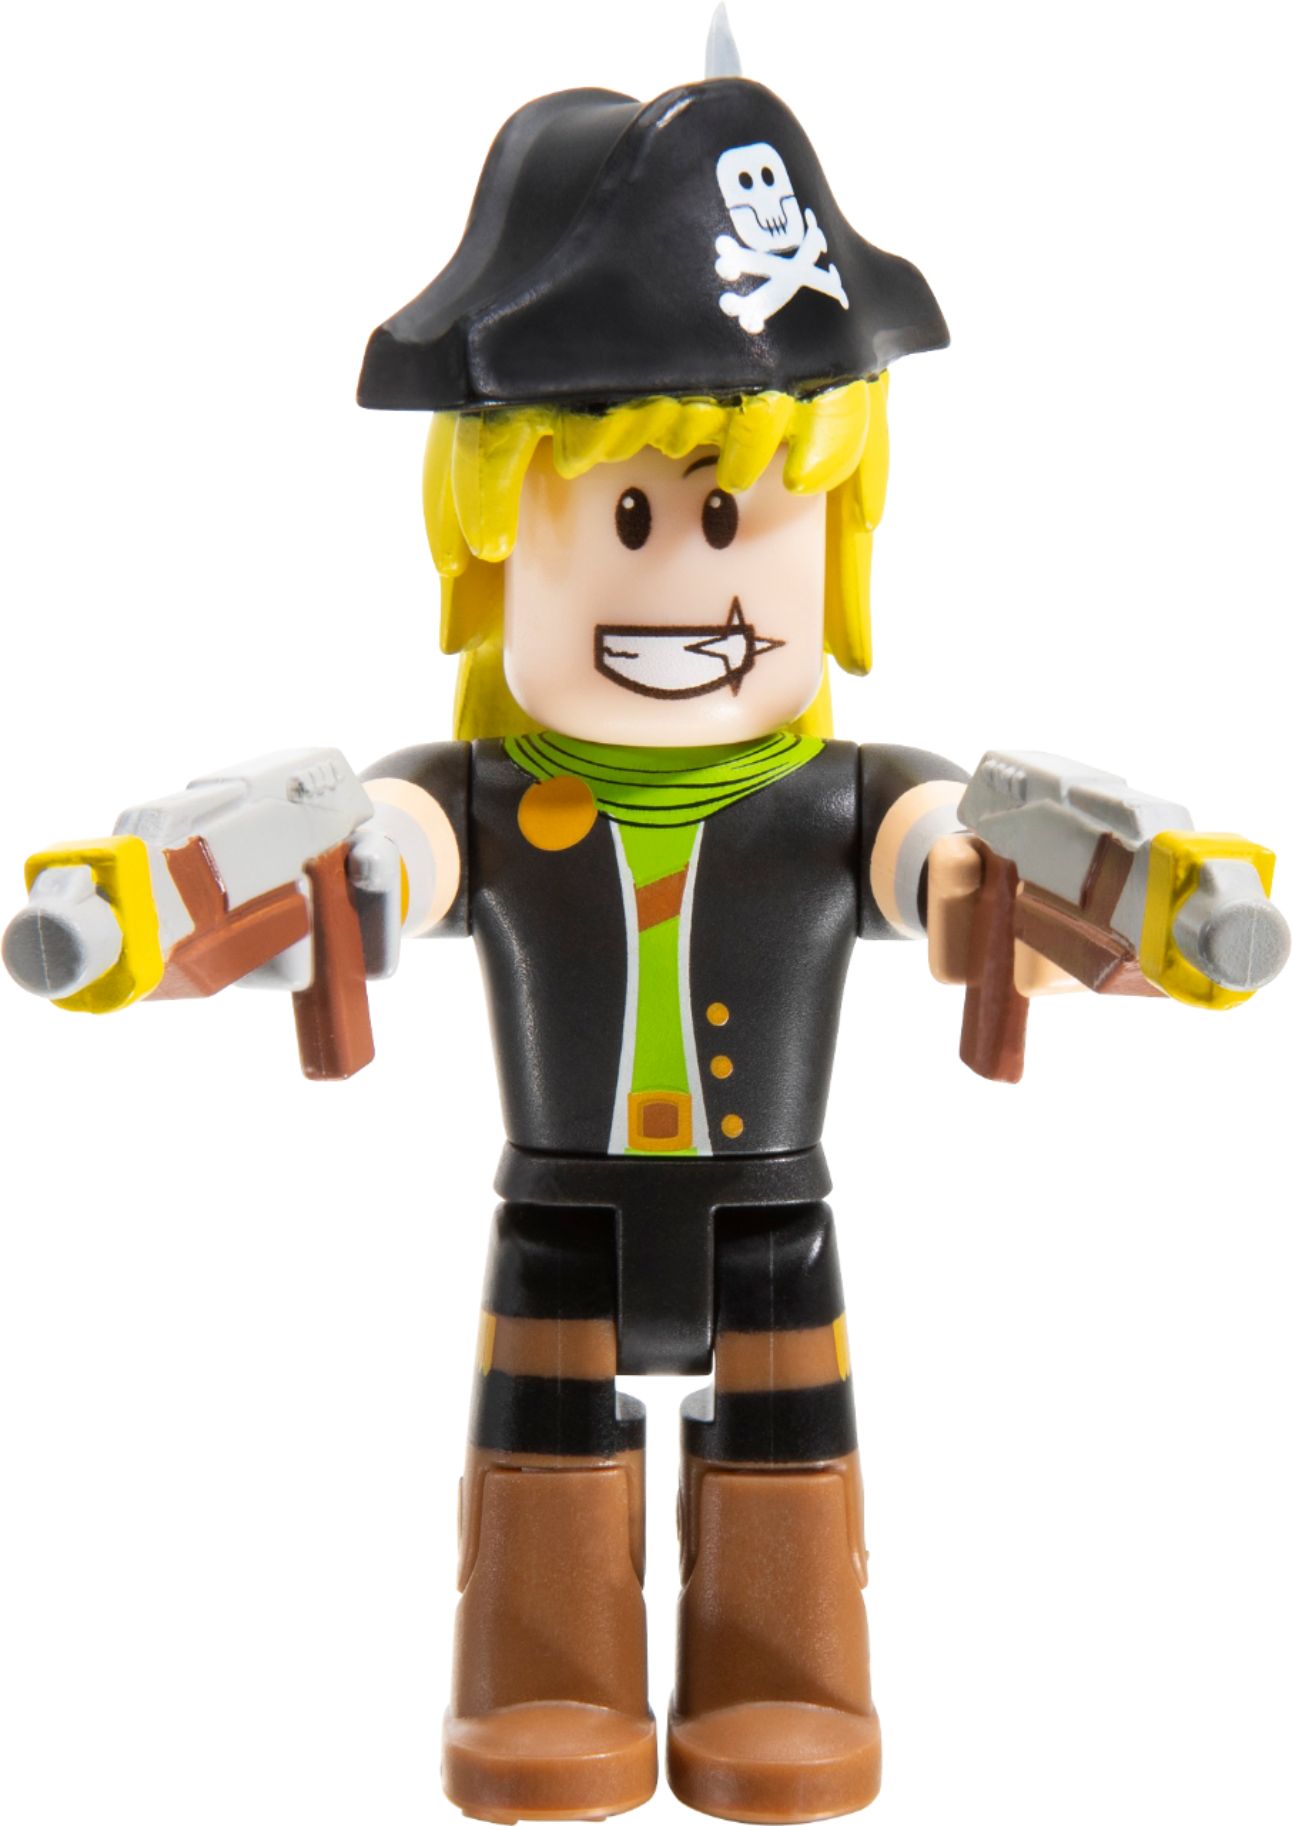 roblox series 6 mystery figure styles may vary